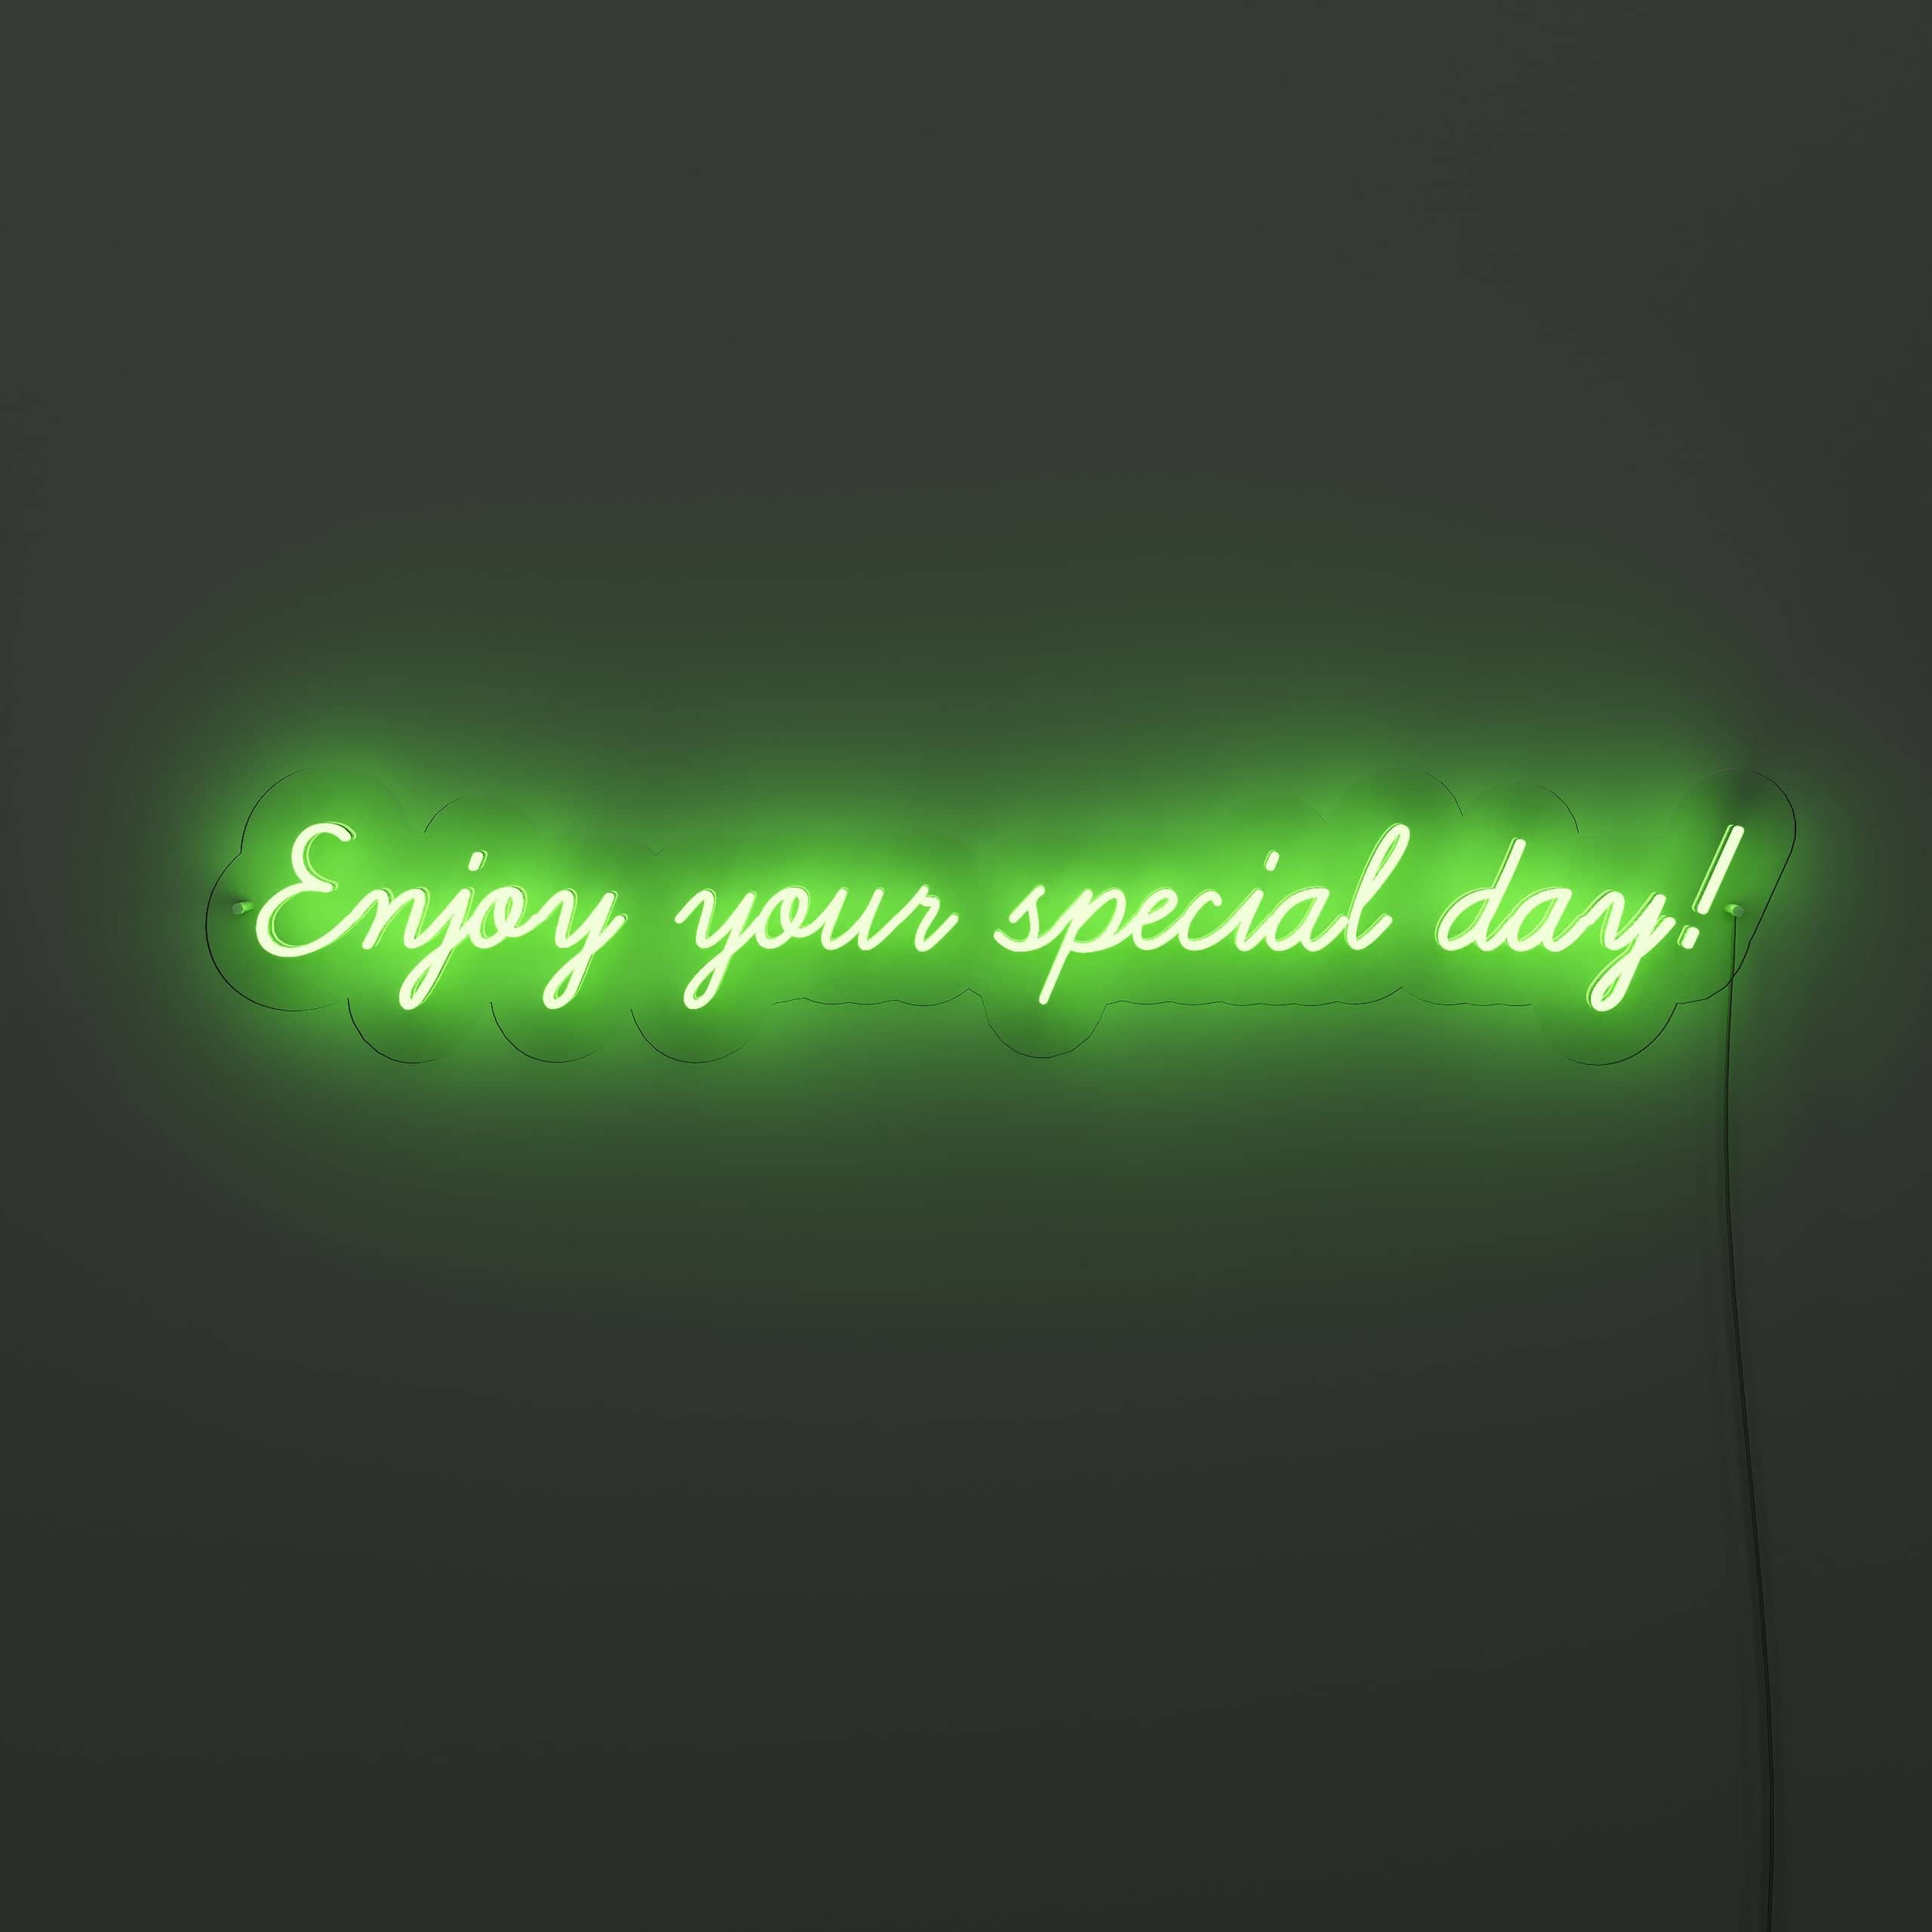 embrace-the-joy-and-excitement-of-your-special-day!-neon-sign-lite